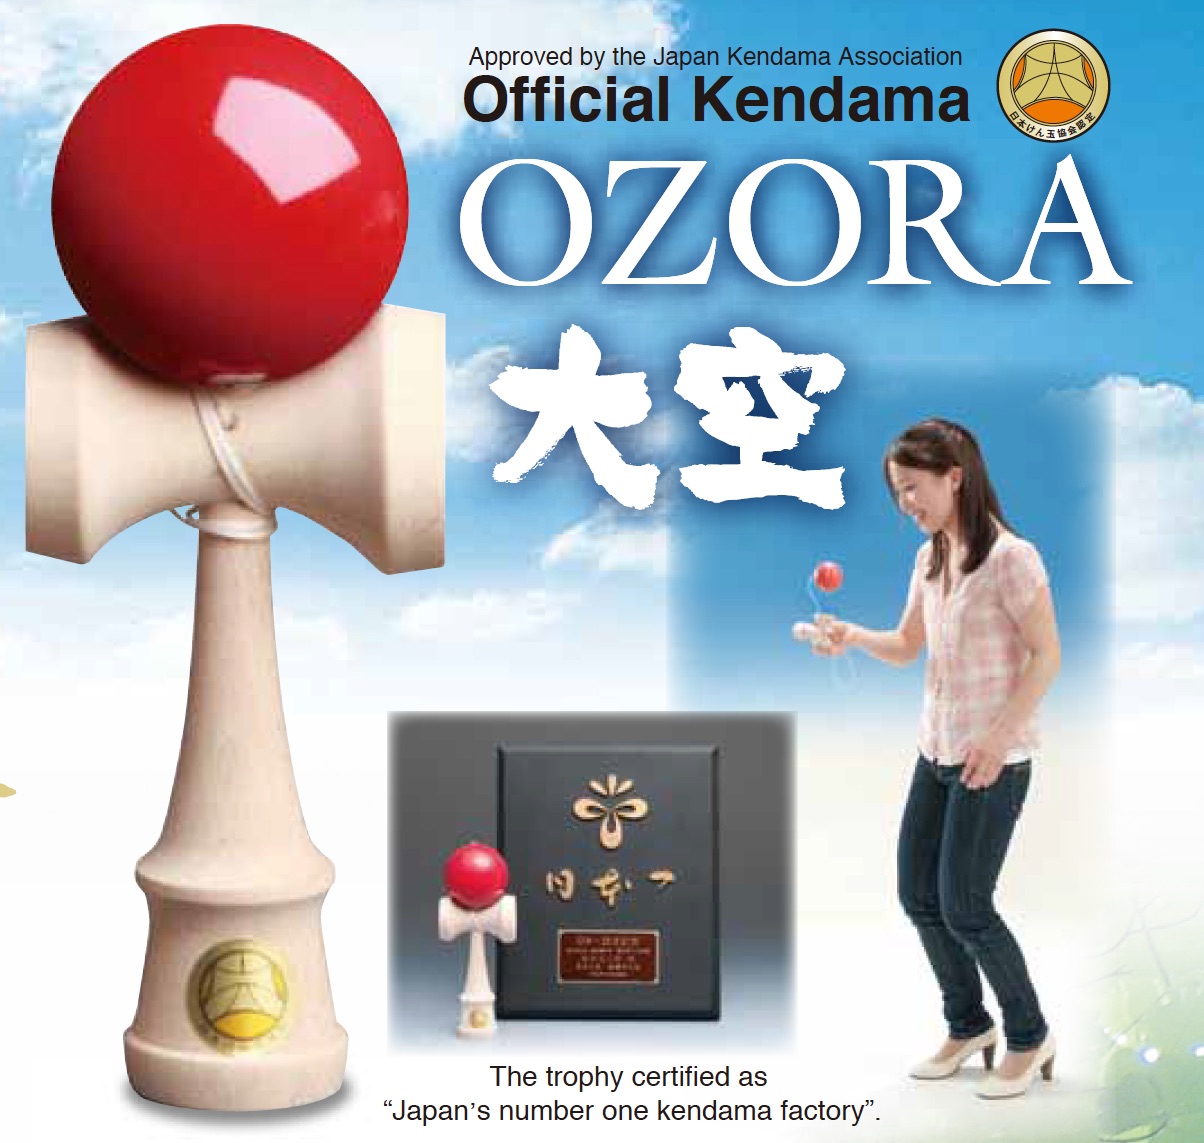 The Official Kendama Story from Japan, OZORA